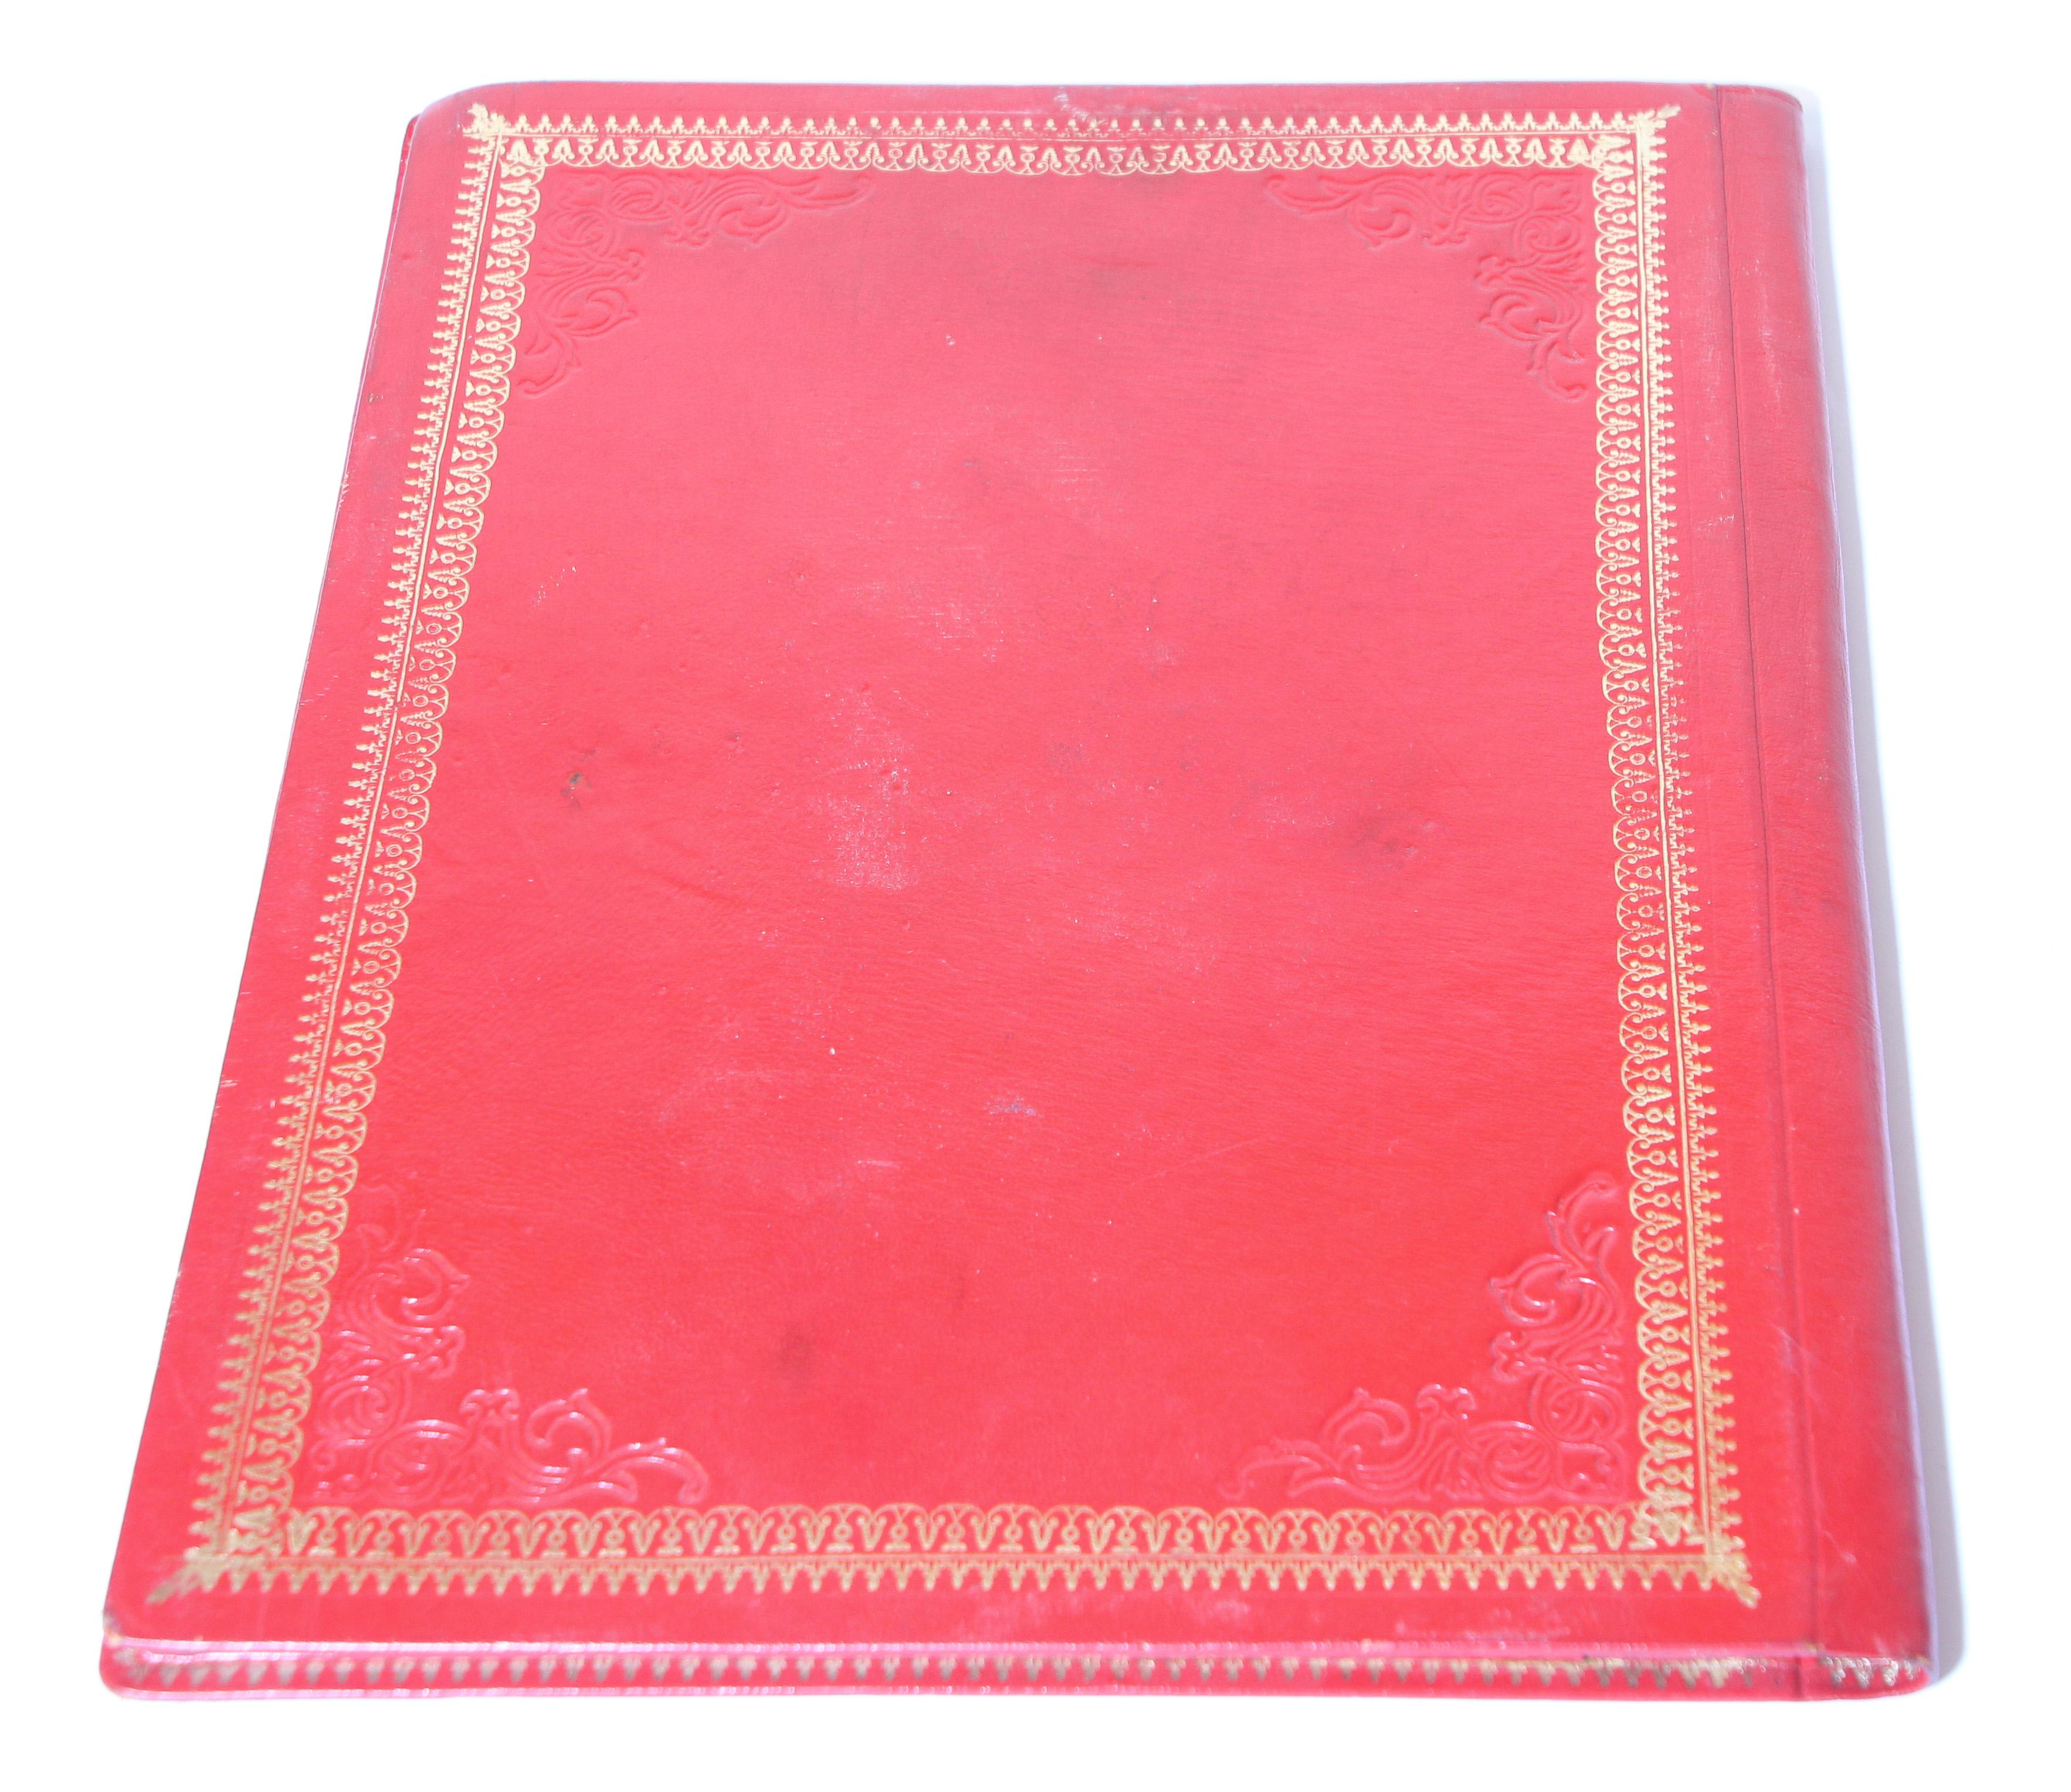 Late 20th Century Vintage Moroccan Embossed Leather Padfolio For Sale